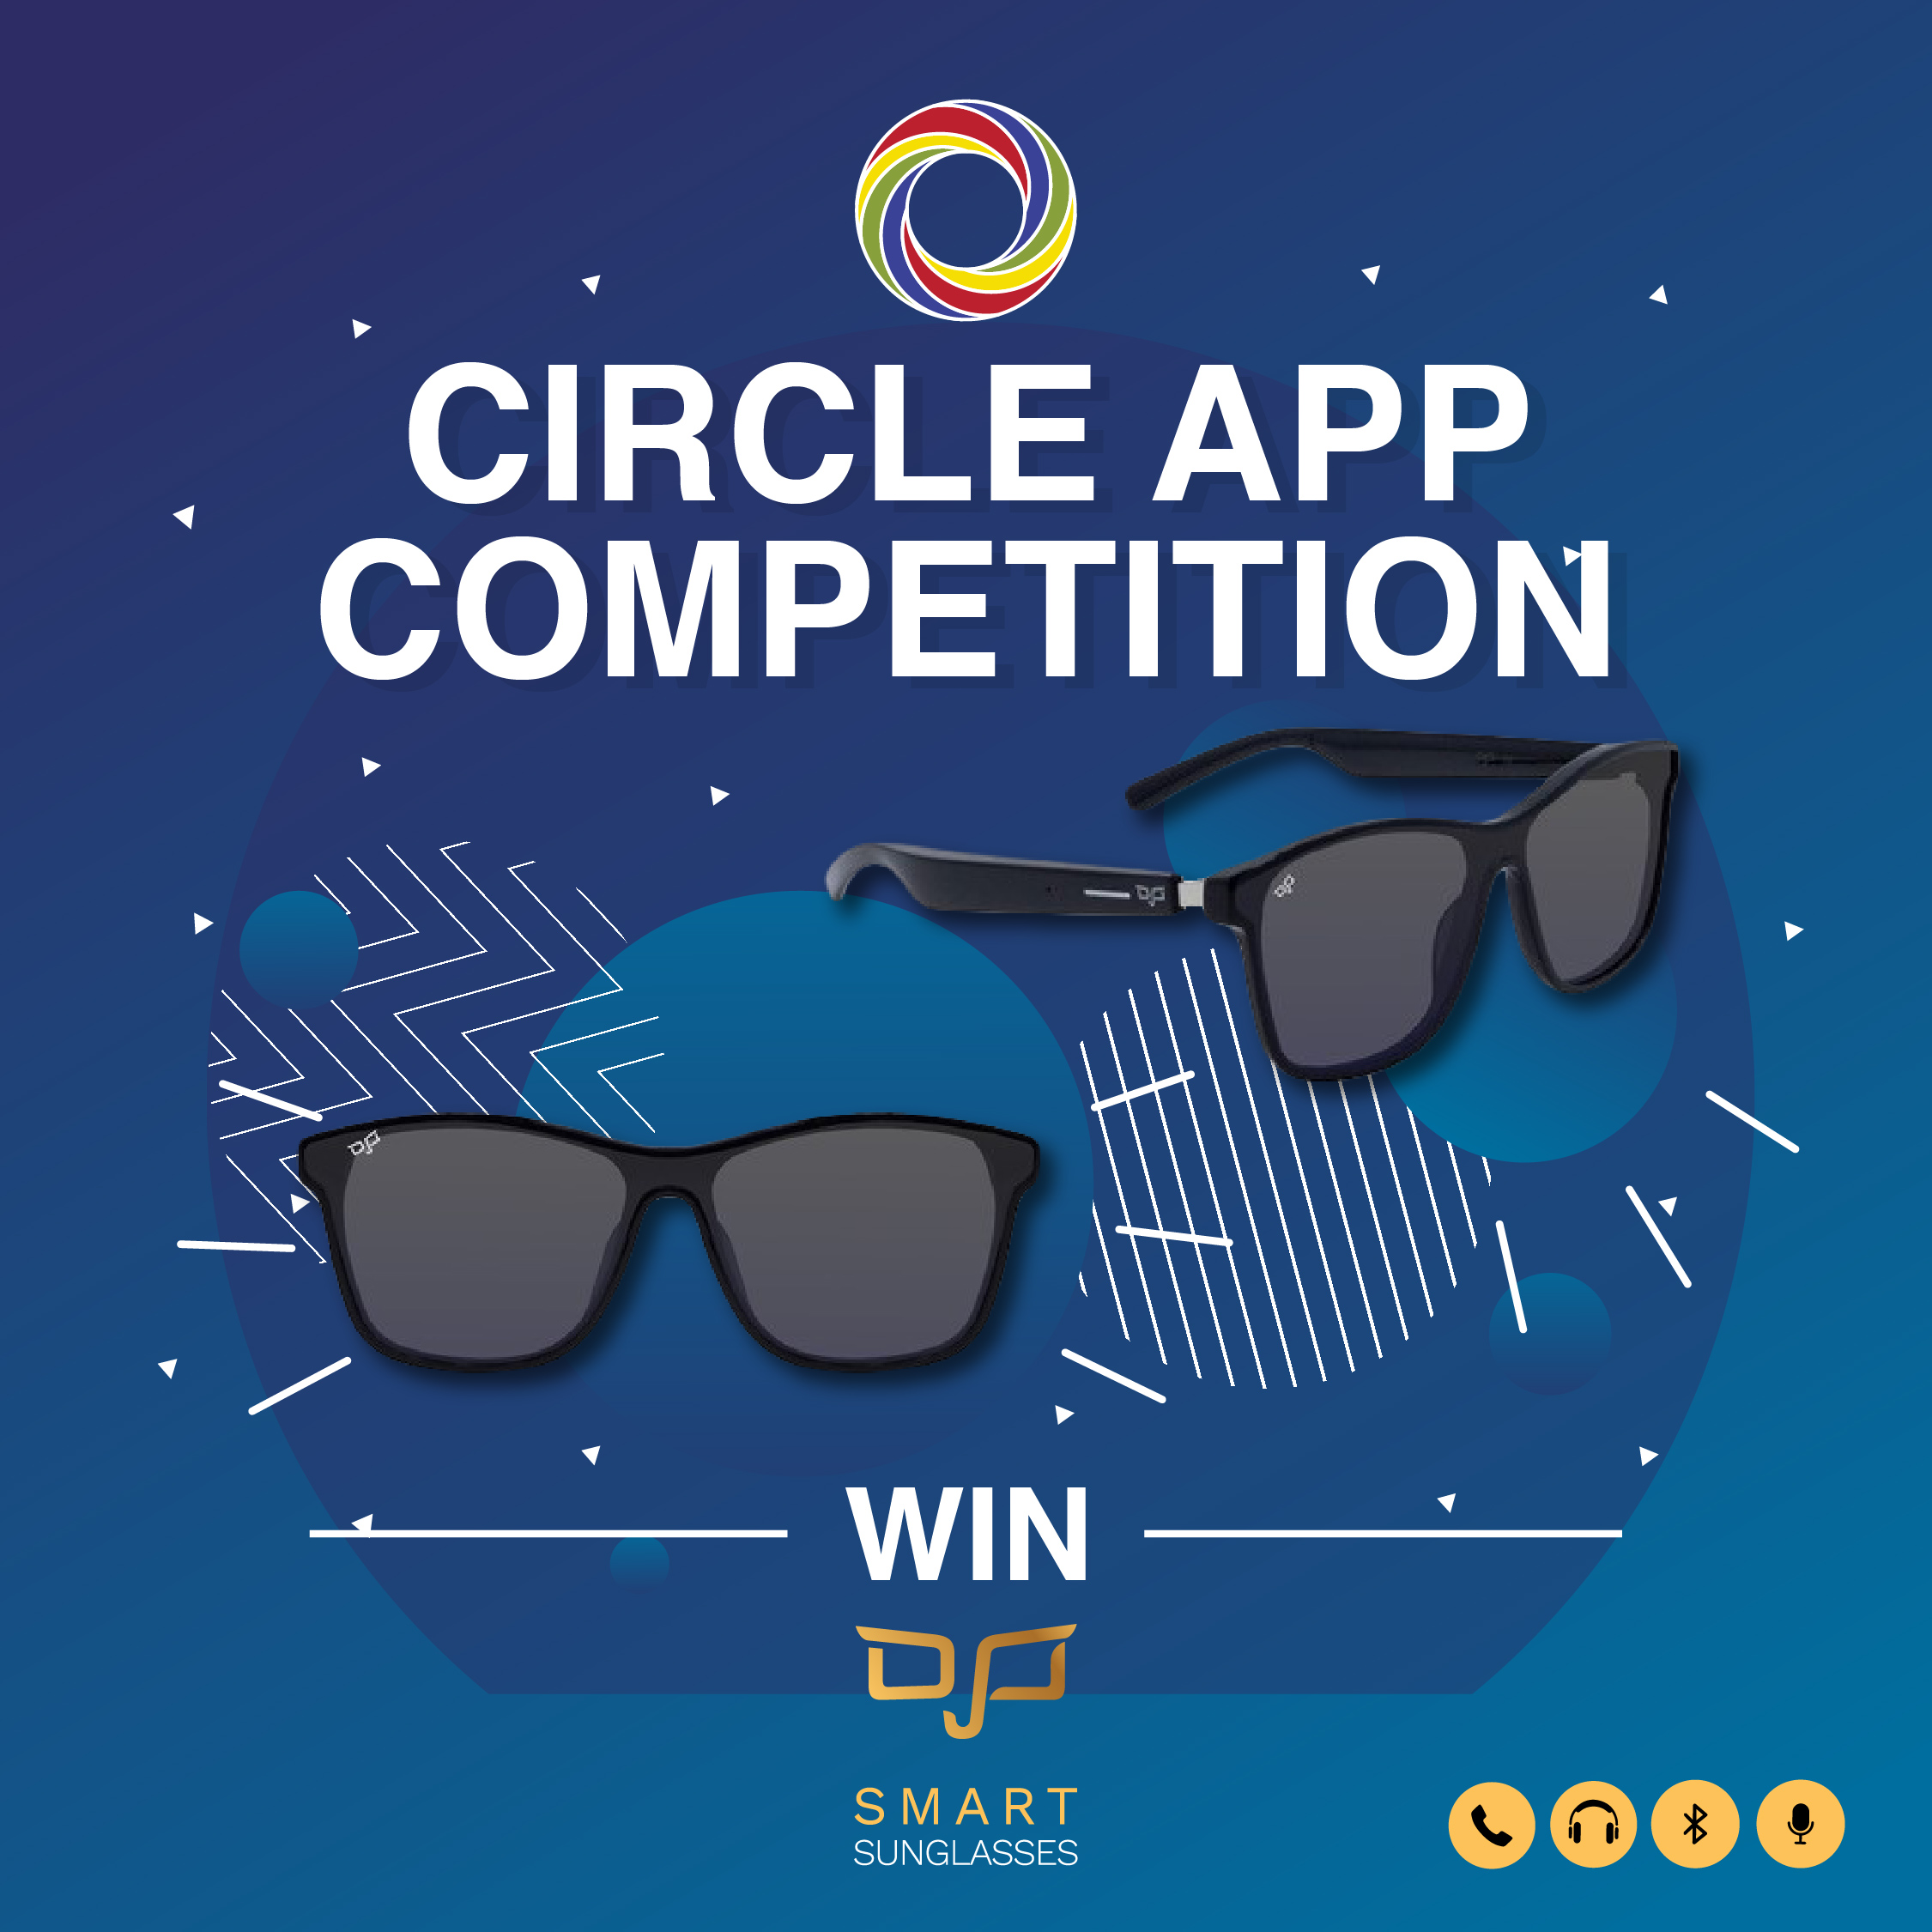 NEW COMPETITION FROM CIRCLE App!